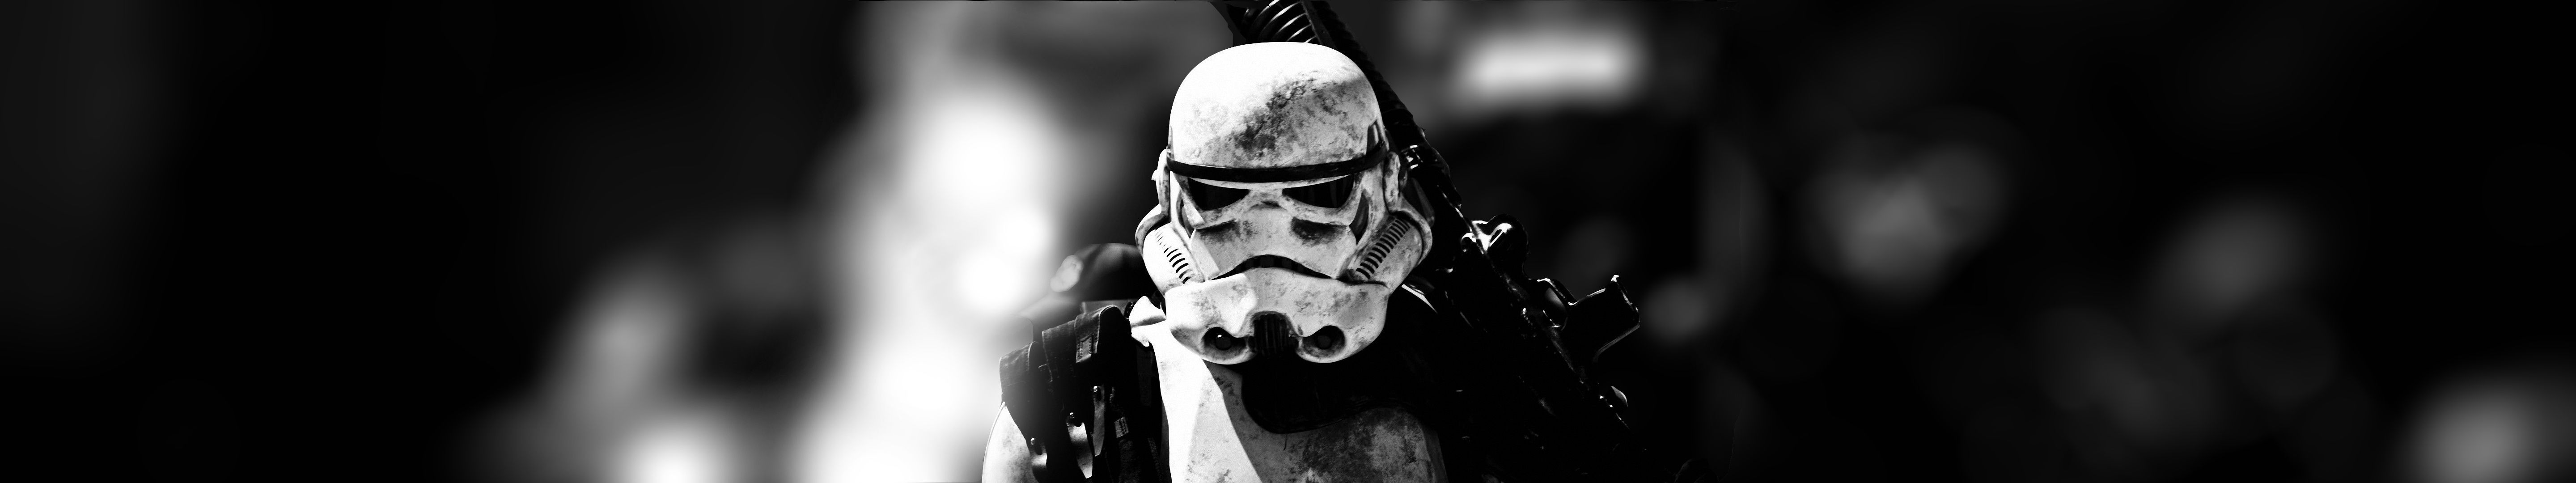 Created My Own Triple Monitor Stormtrooper Wallpaper To Match